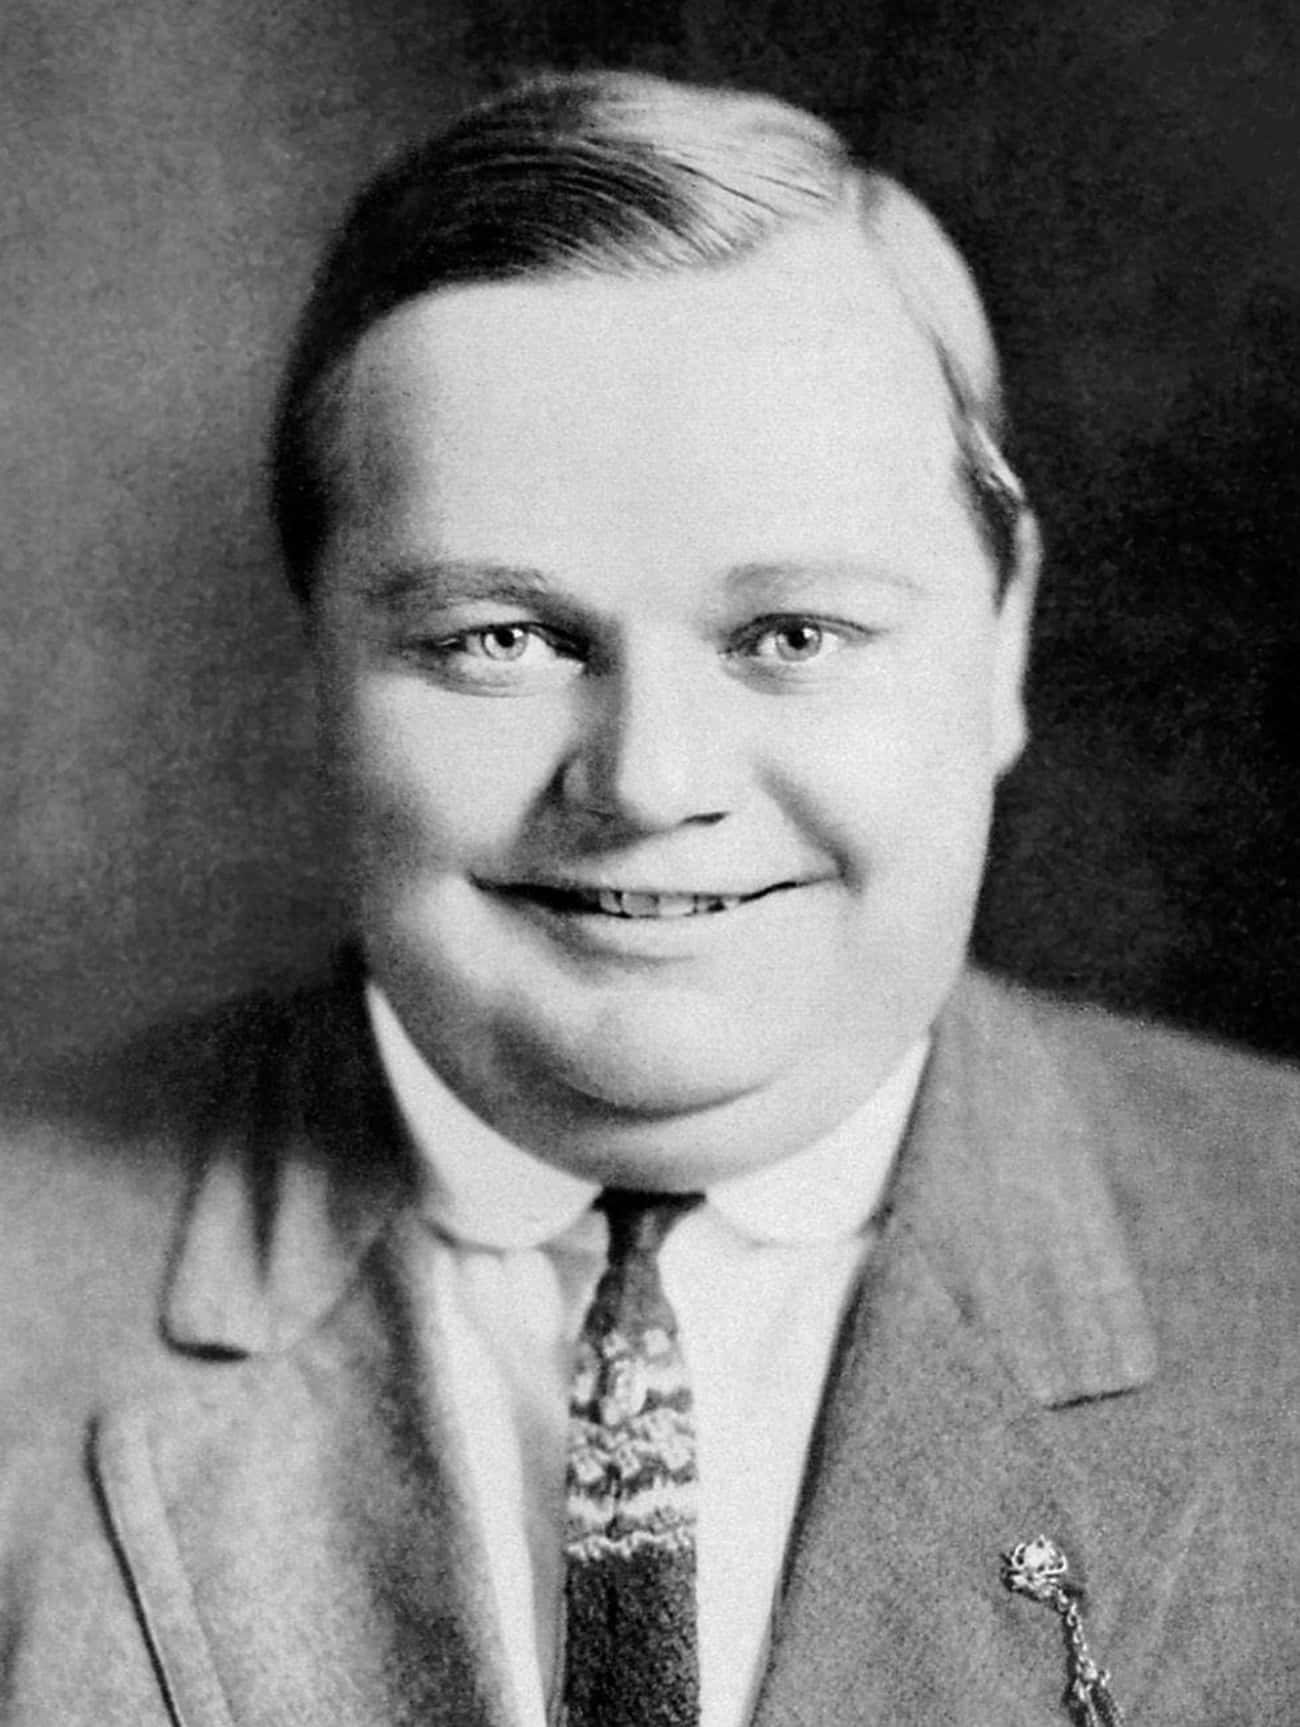 Roscoe Arbuckle Was One Of The Biggest Movie Stars In The World - Then He Was On Trial For Murder